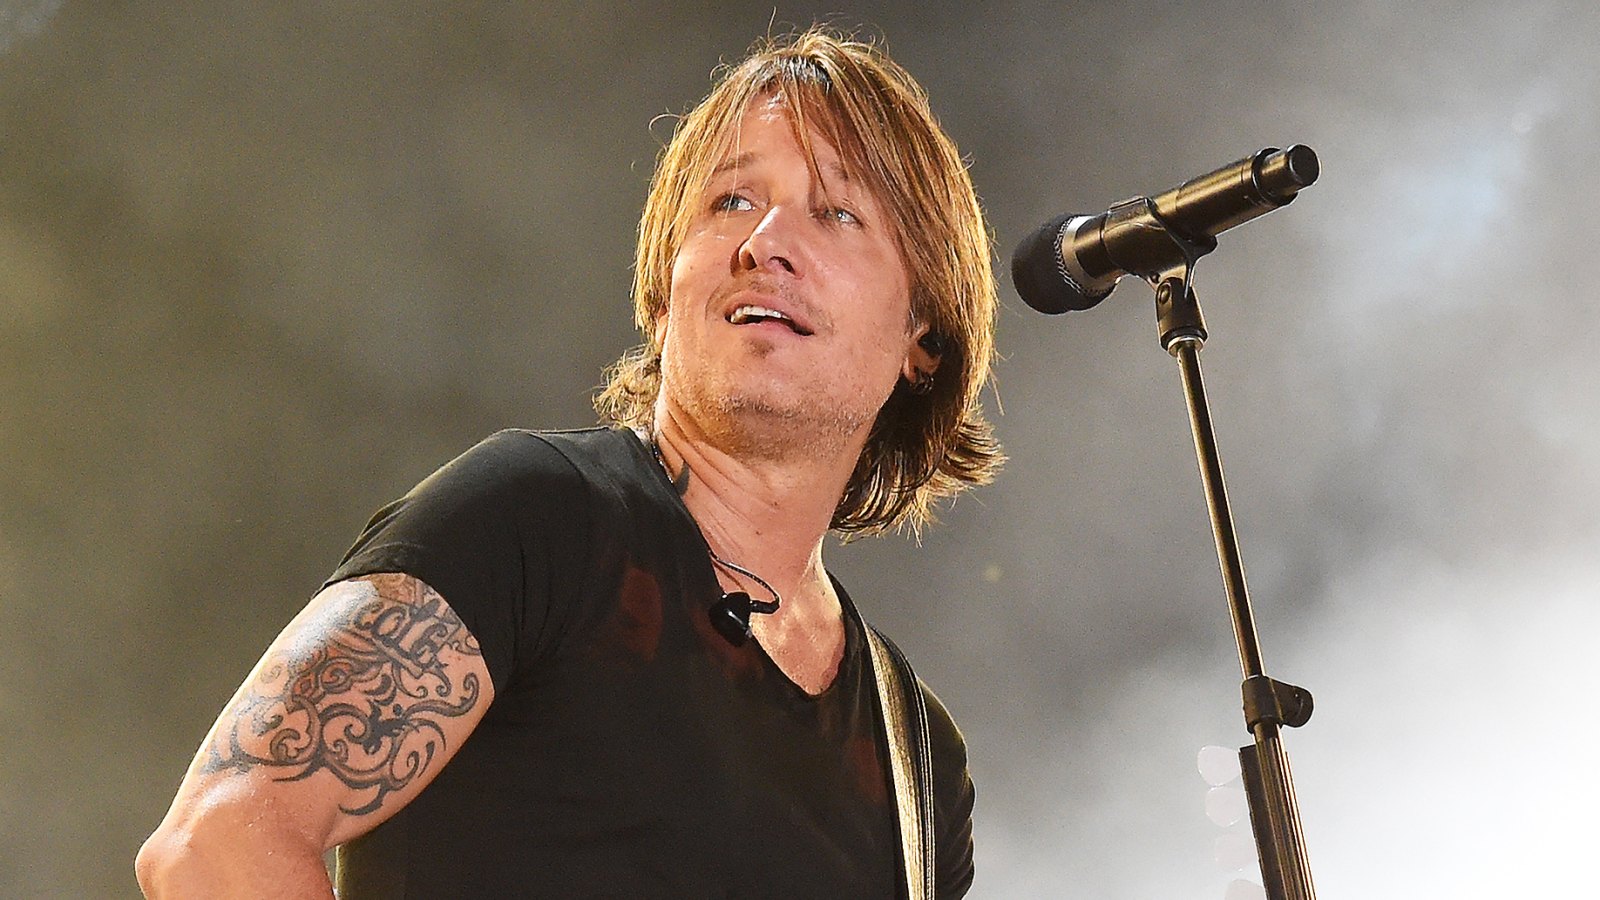 Keith Urban to Host the ACM Awards Live from Grand Ole Opry